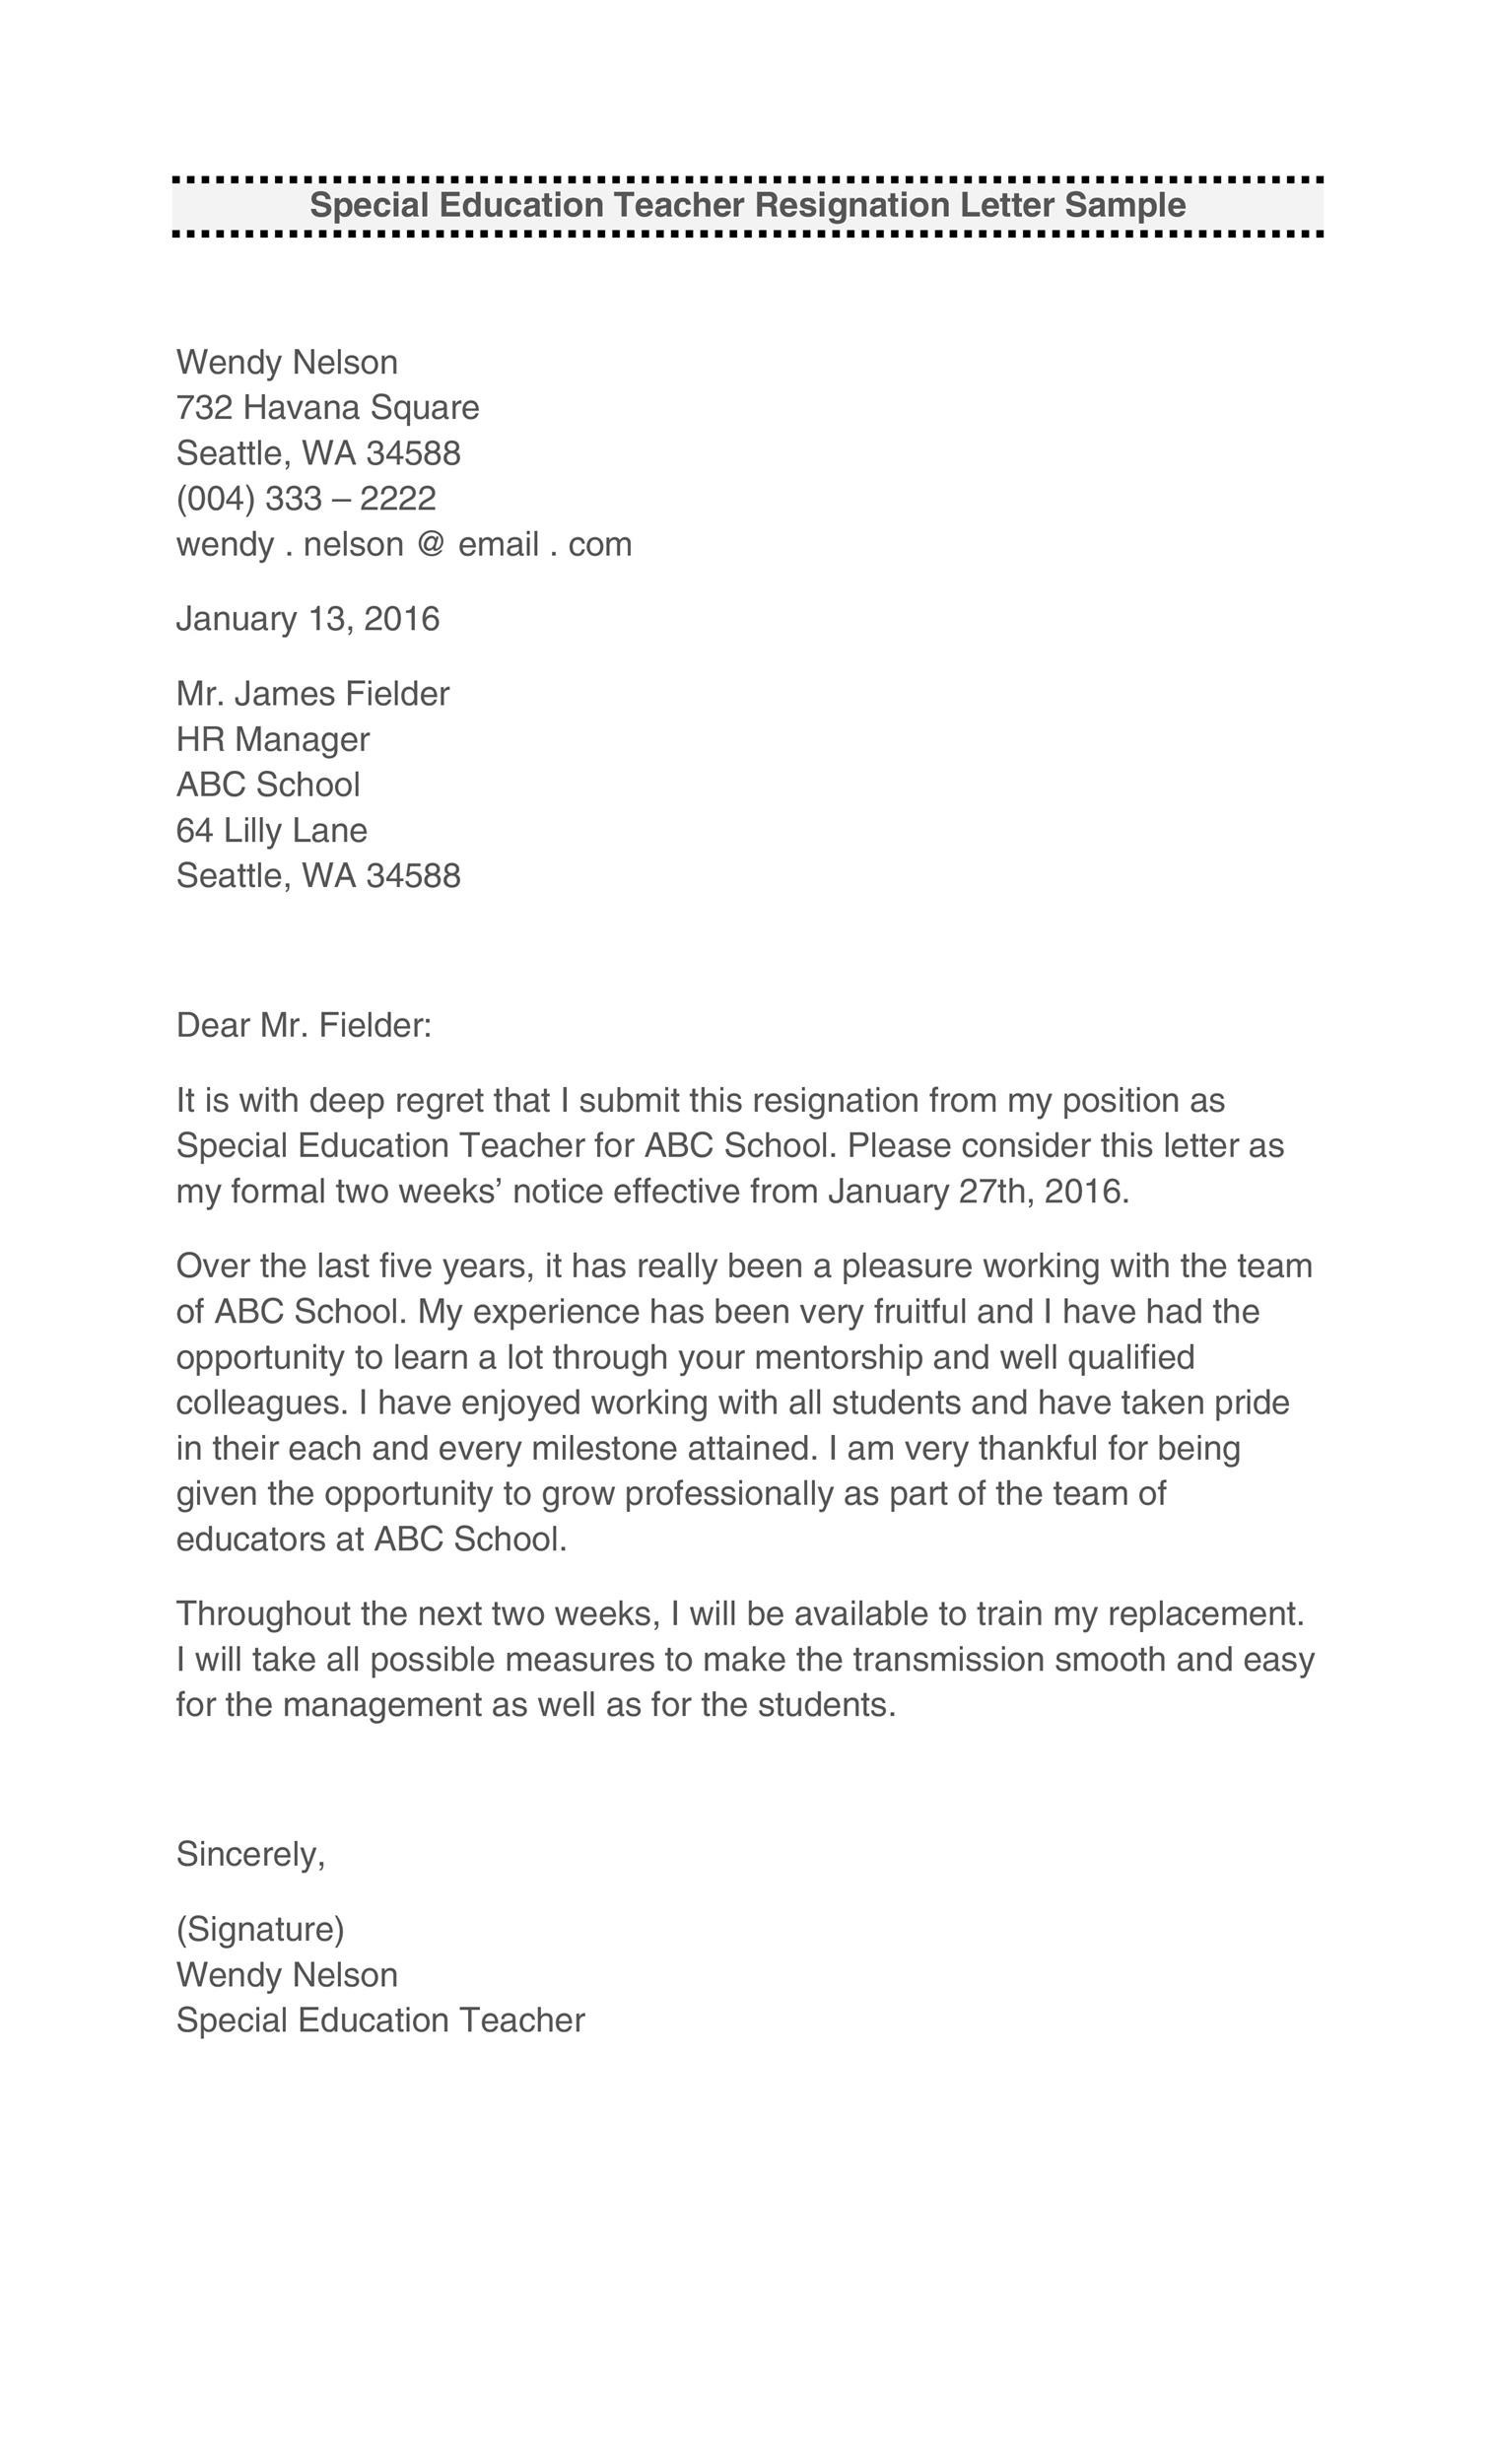 Letter Of Intent To Resign from templatelab.com